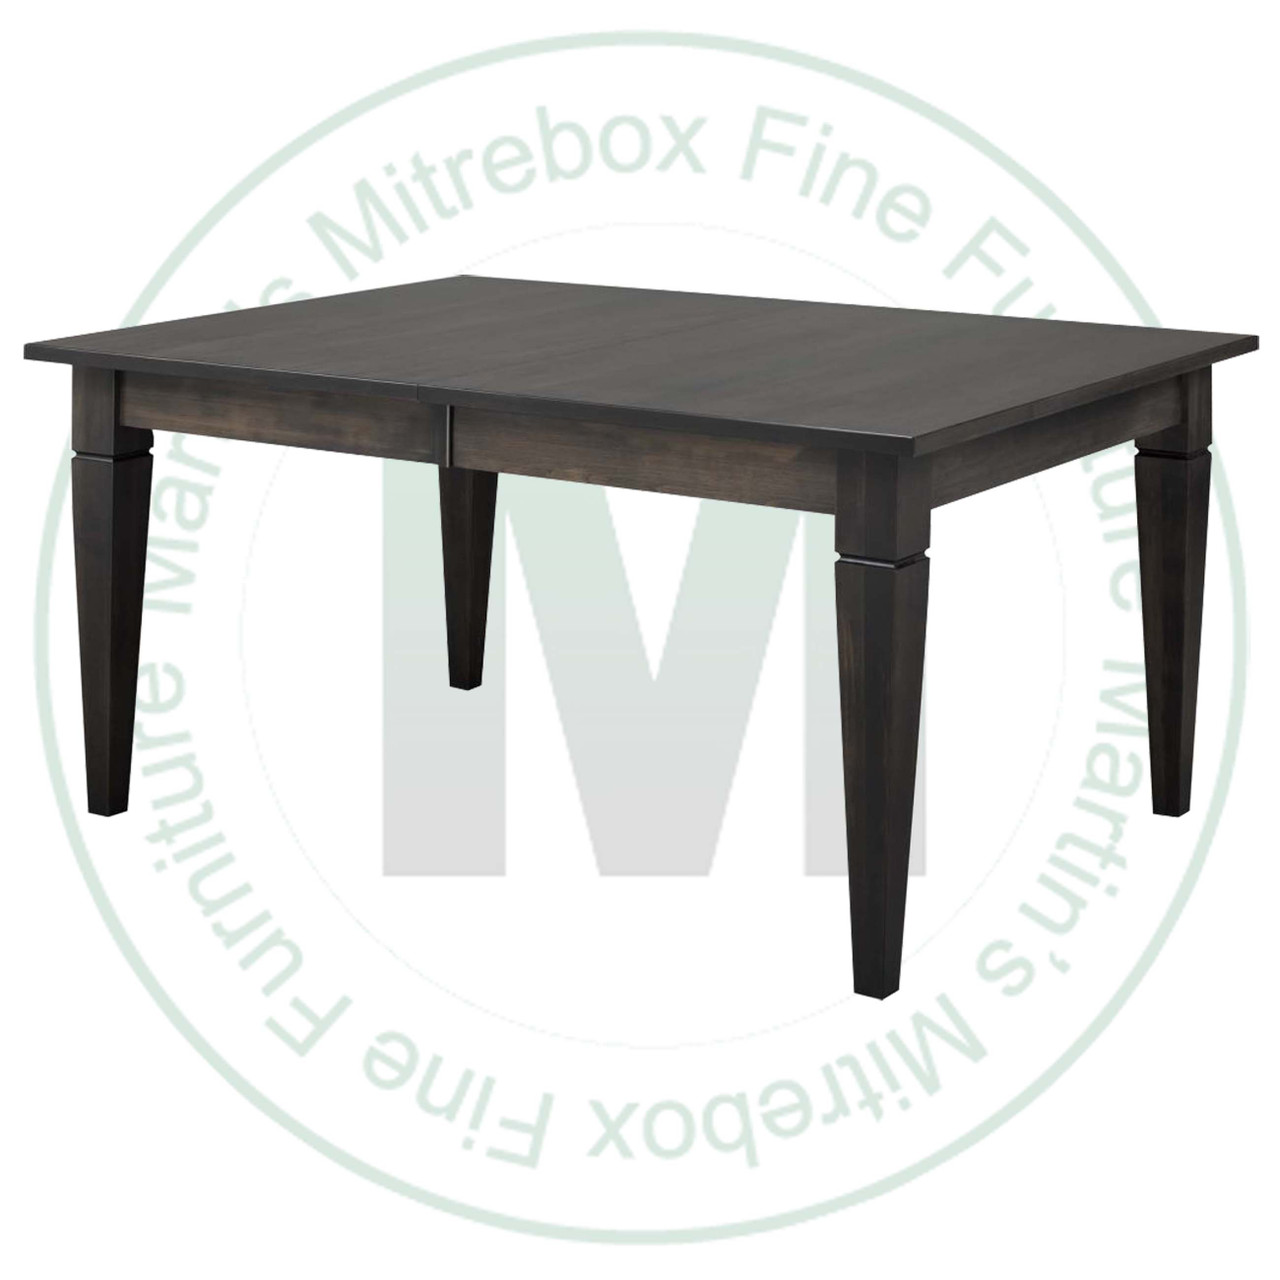 Maple Reesor Solid Top Harvest Table 36''D x 36''W x 30''H Table Has 1 3/4'' Thick Top And 2 - 16'' Extensions